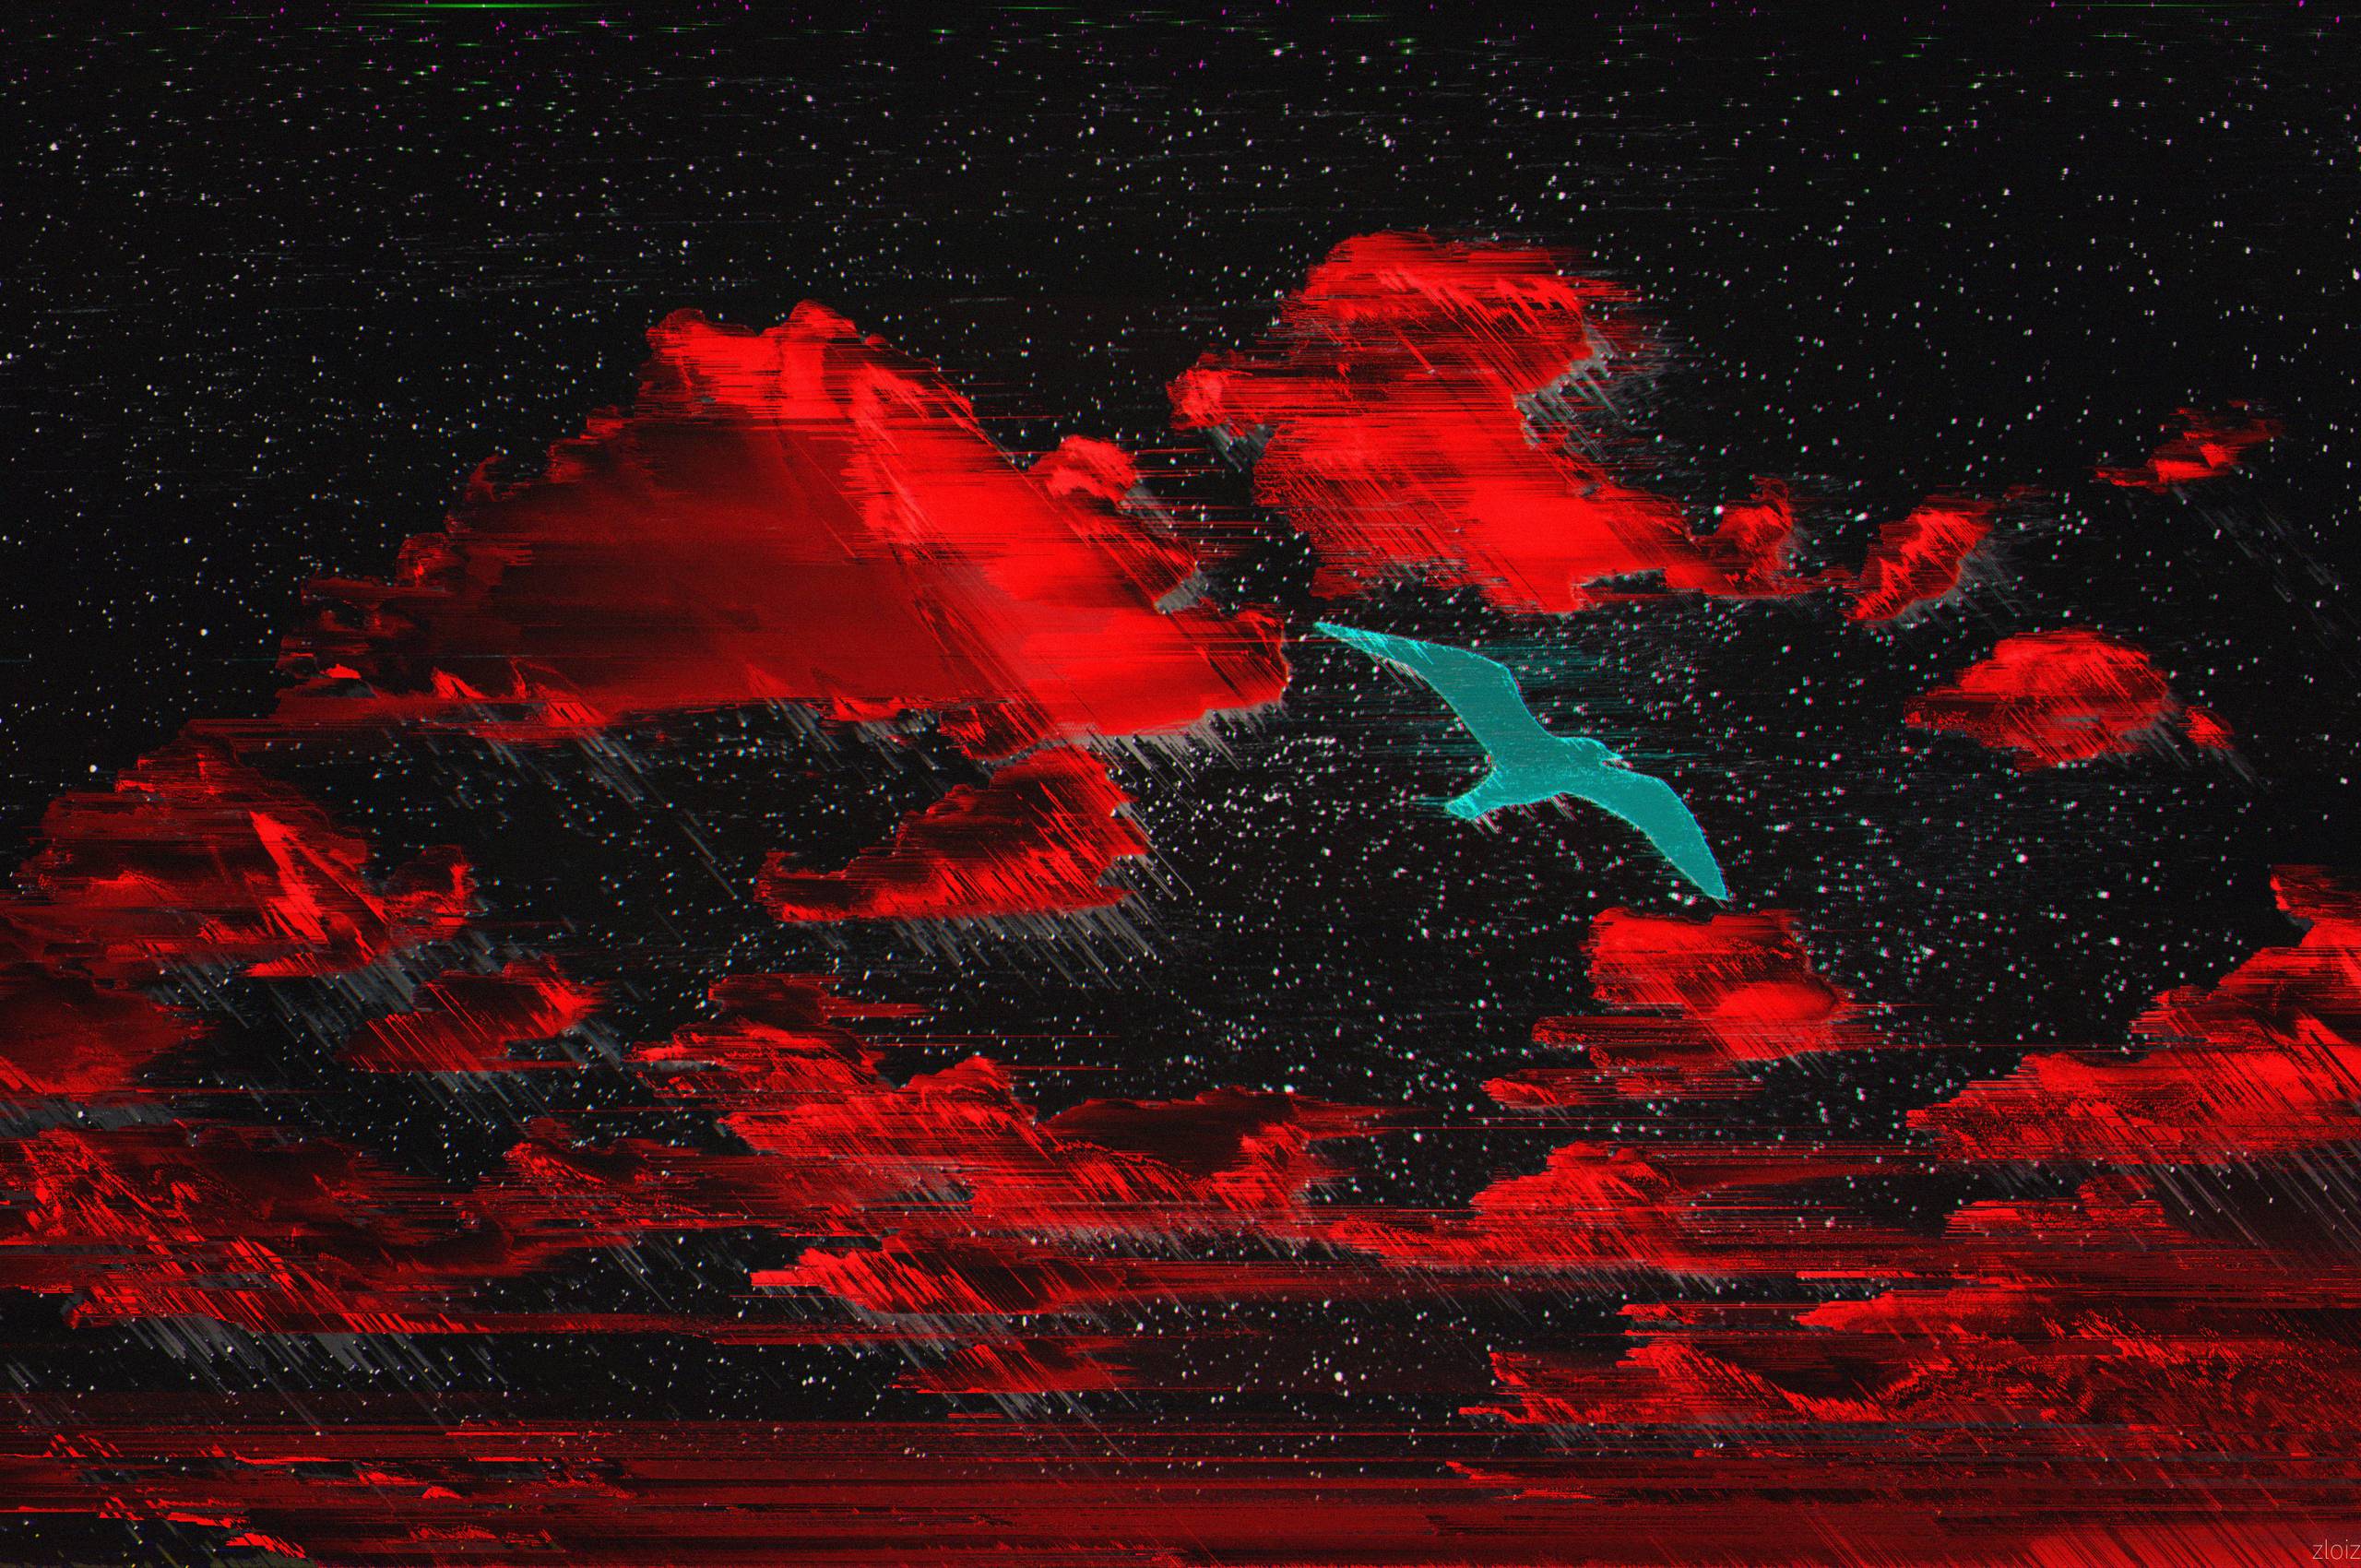 A bird flying over the ocean at night - Glitch